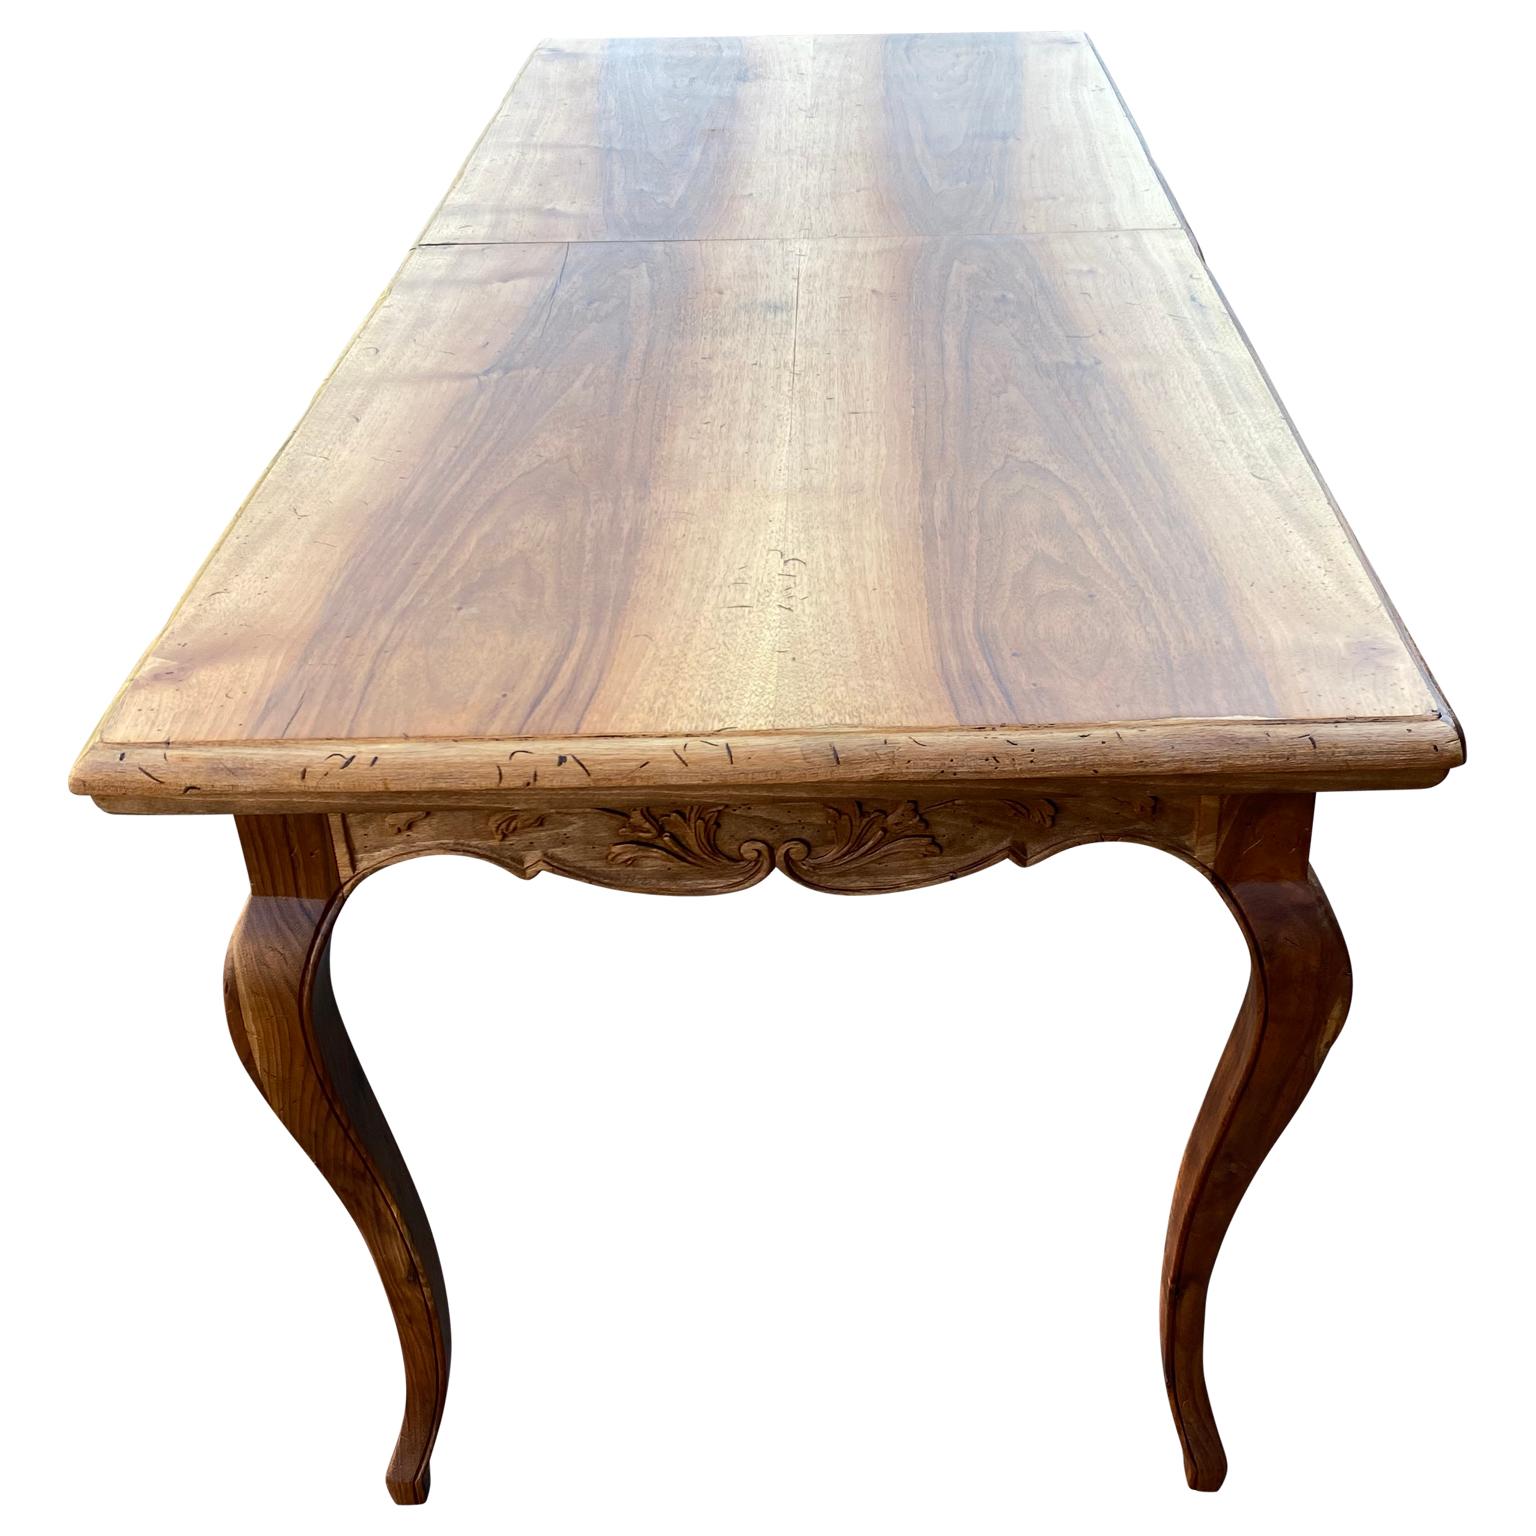 Long Italian vintage farmhouse dining table with two leaves
Marked 